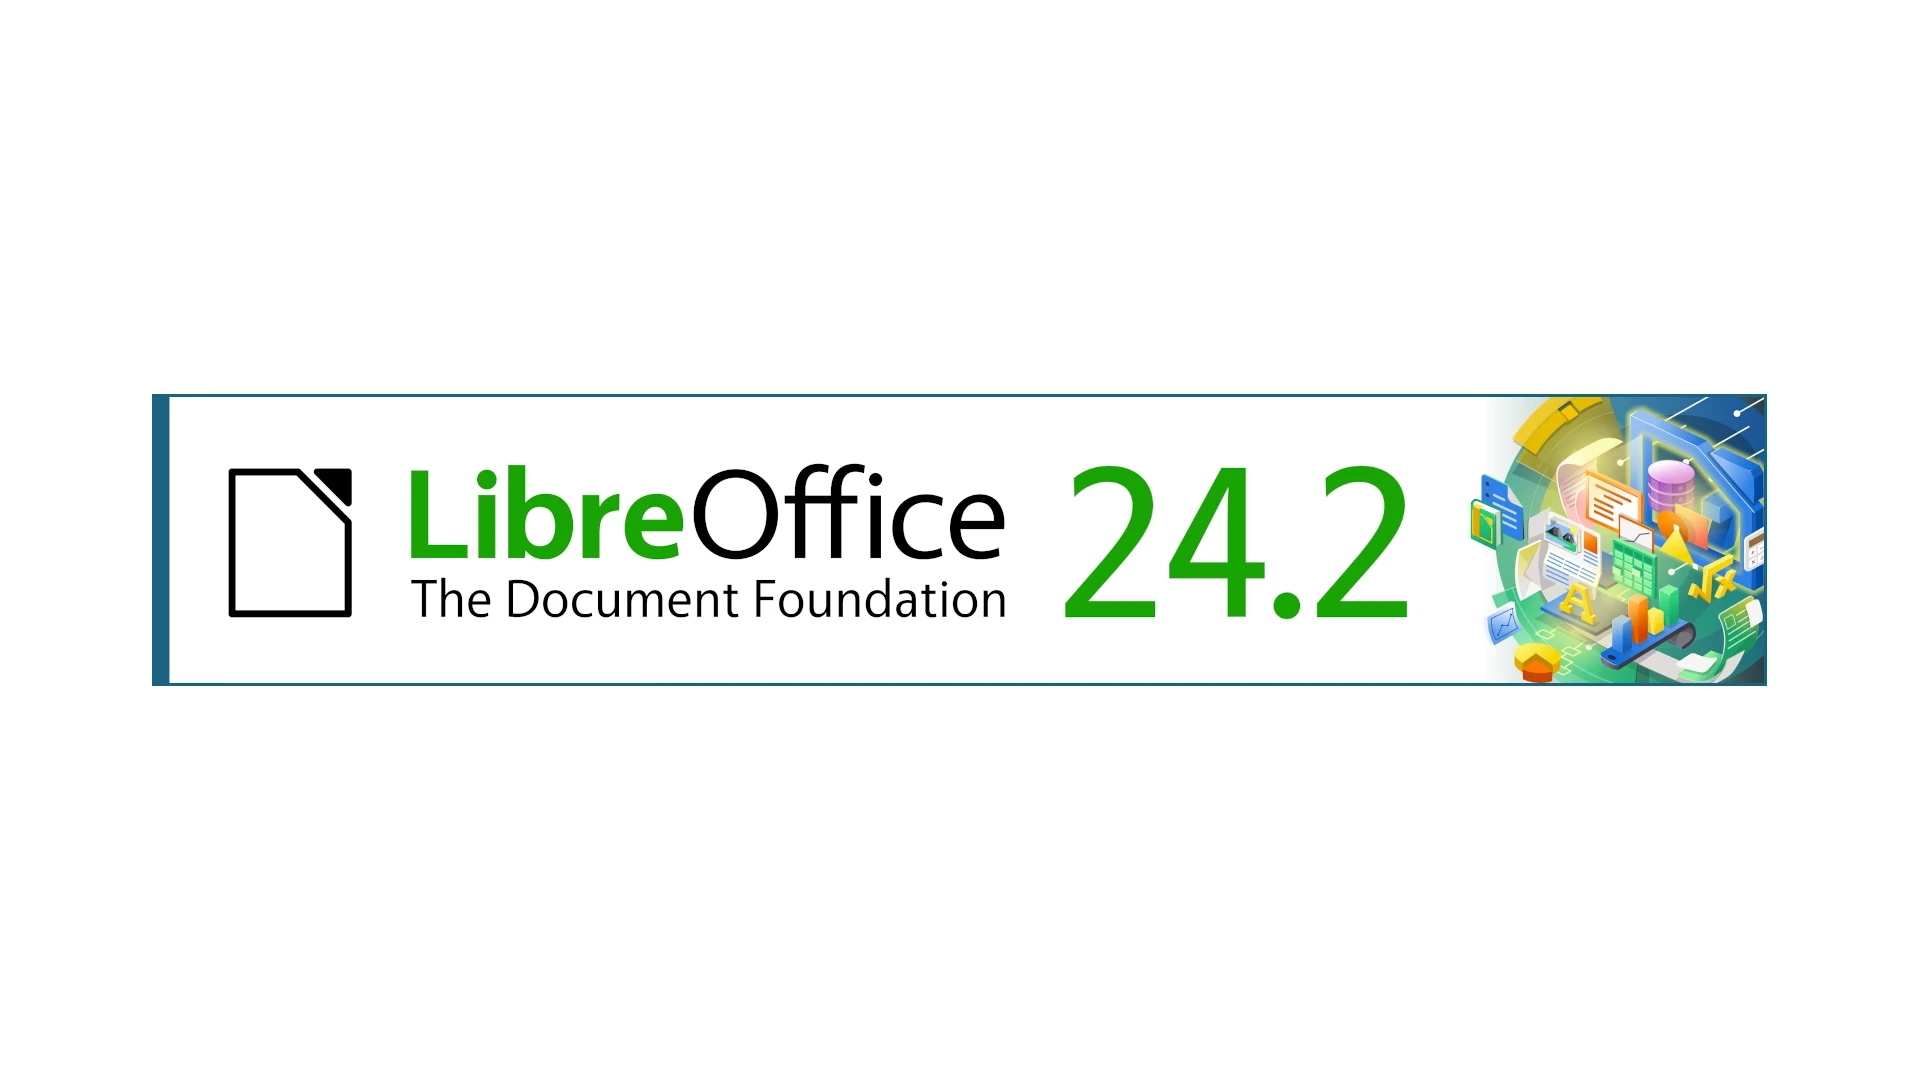 New Release: LibreOffice 24.2.1 Office Suite Out Now, Featuring Over 100 Bug Fixes